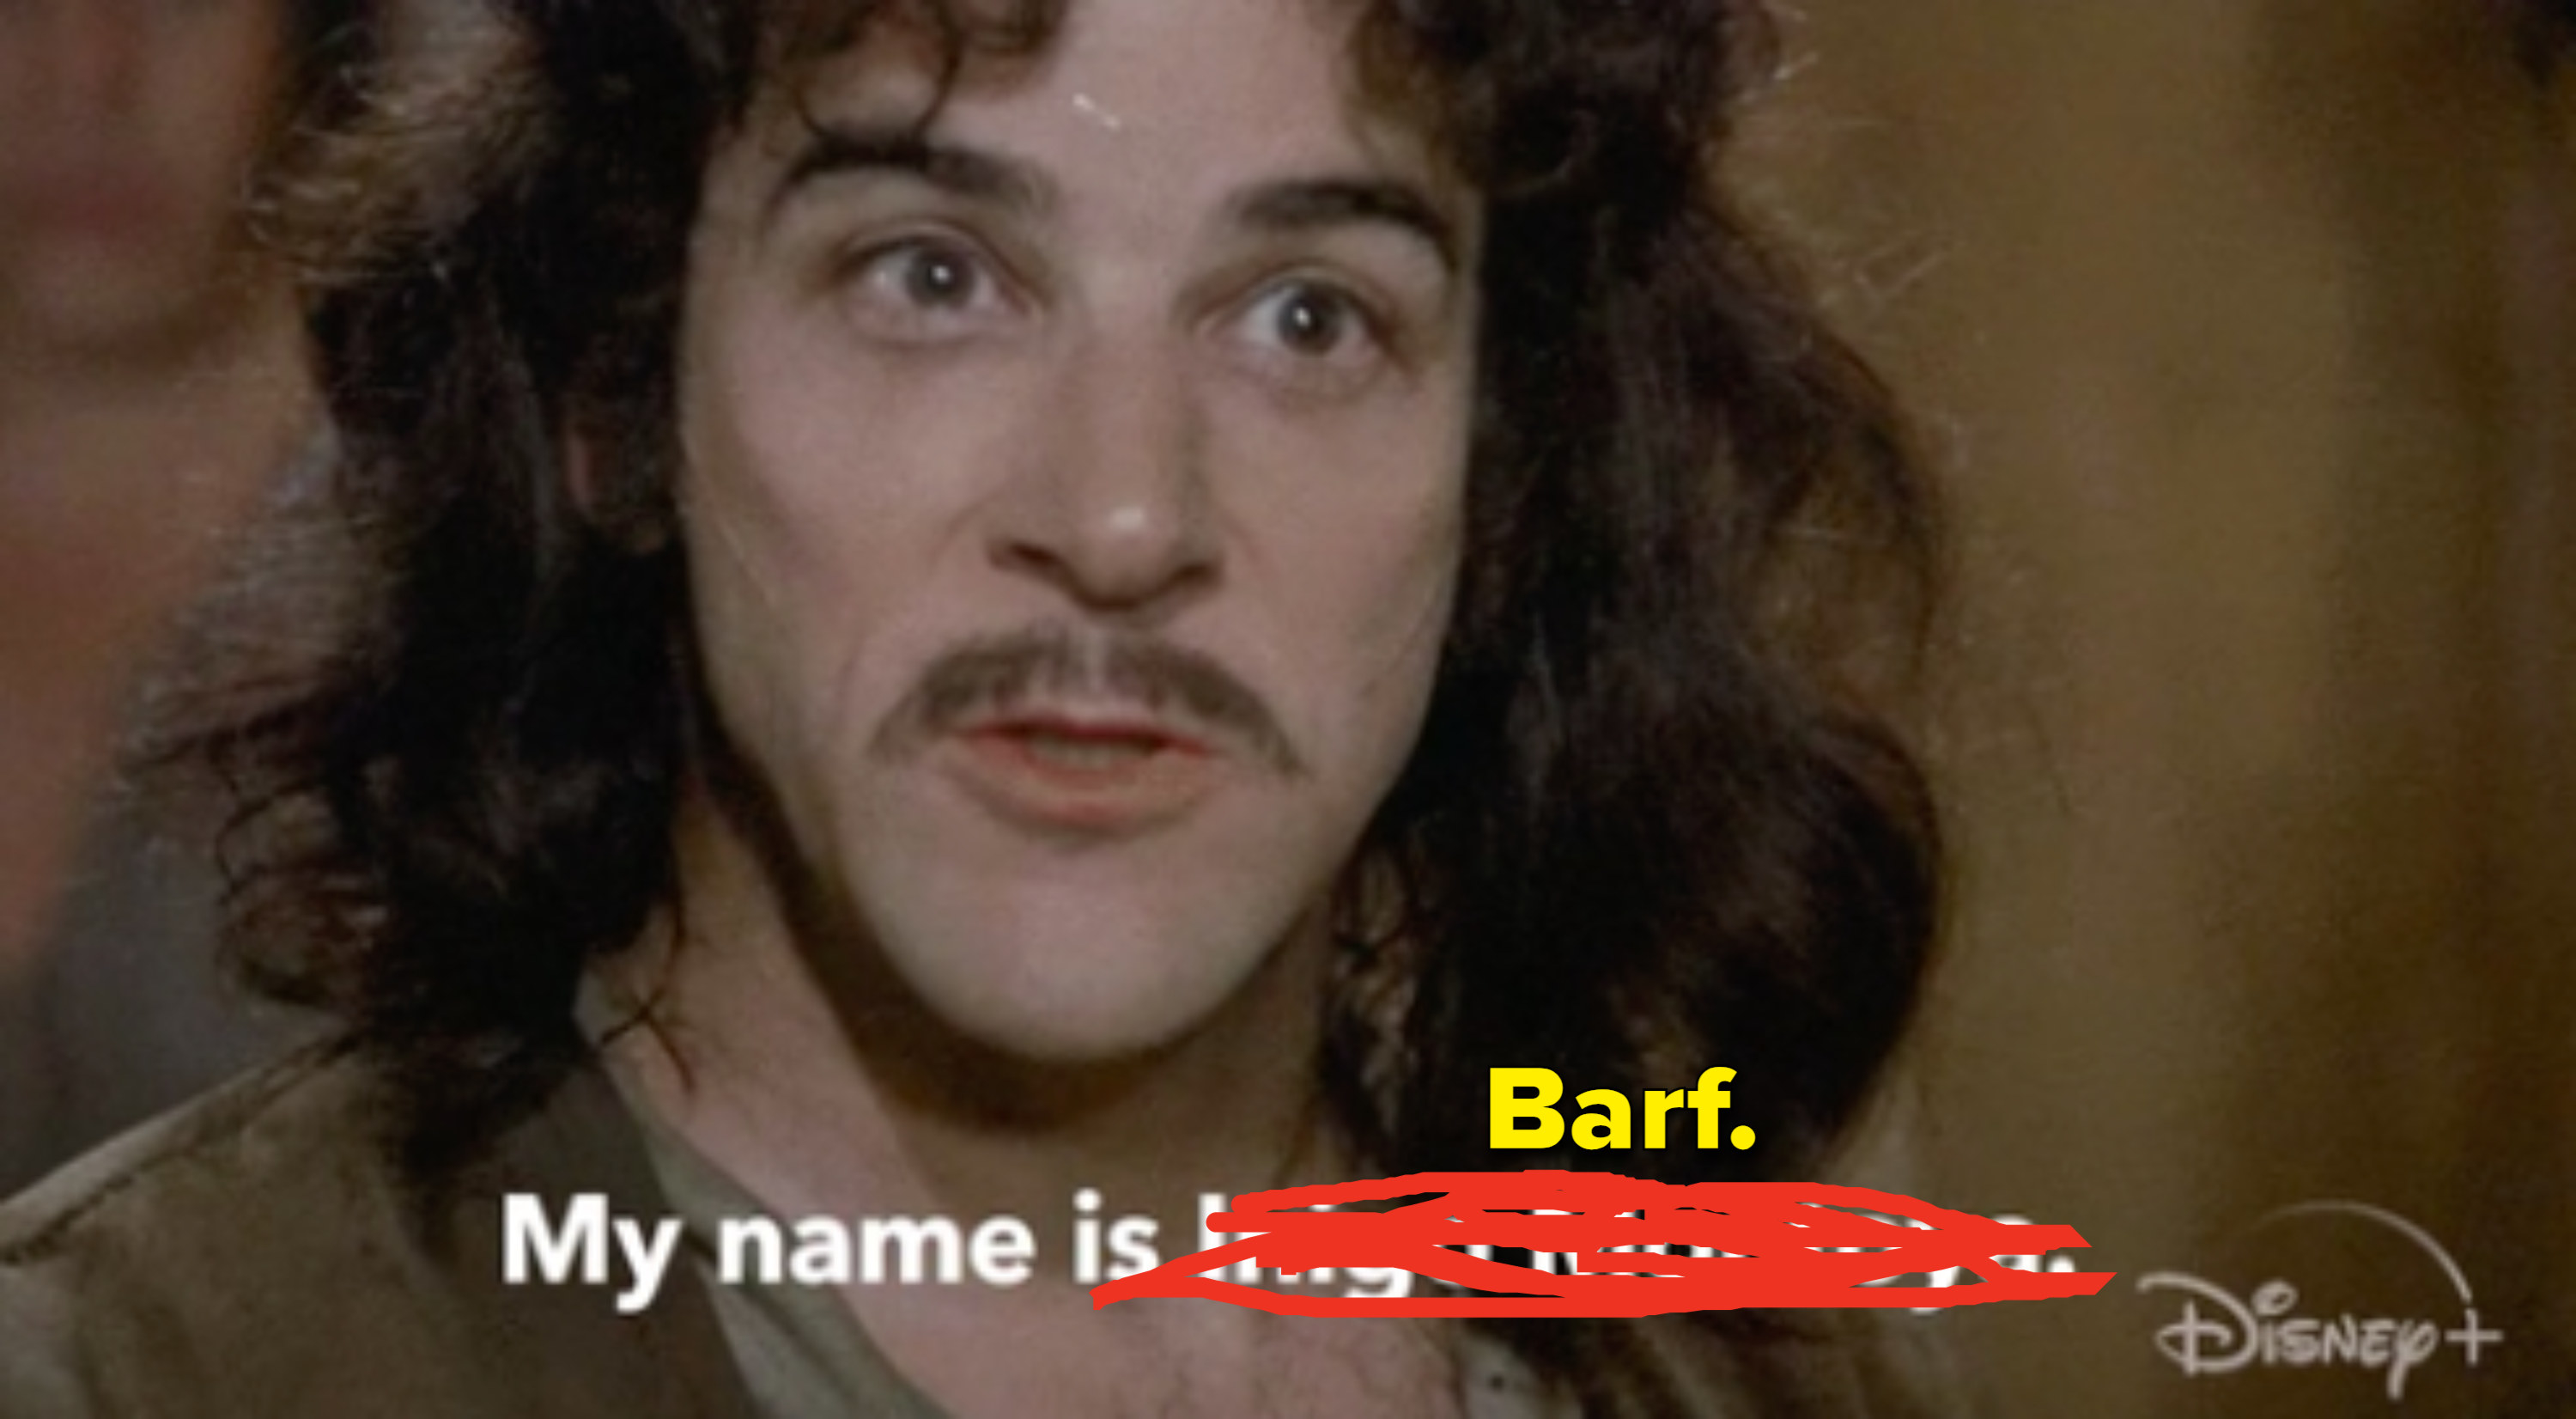 Inigo Montoya saying his name but his name is scratched out and it says &quot;Barf&quot;